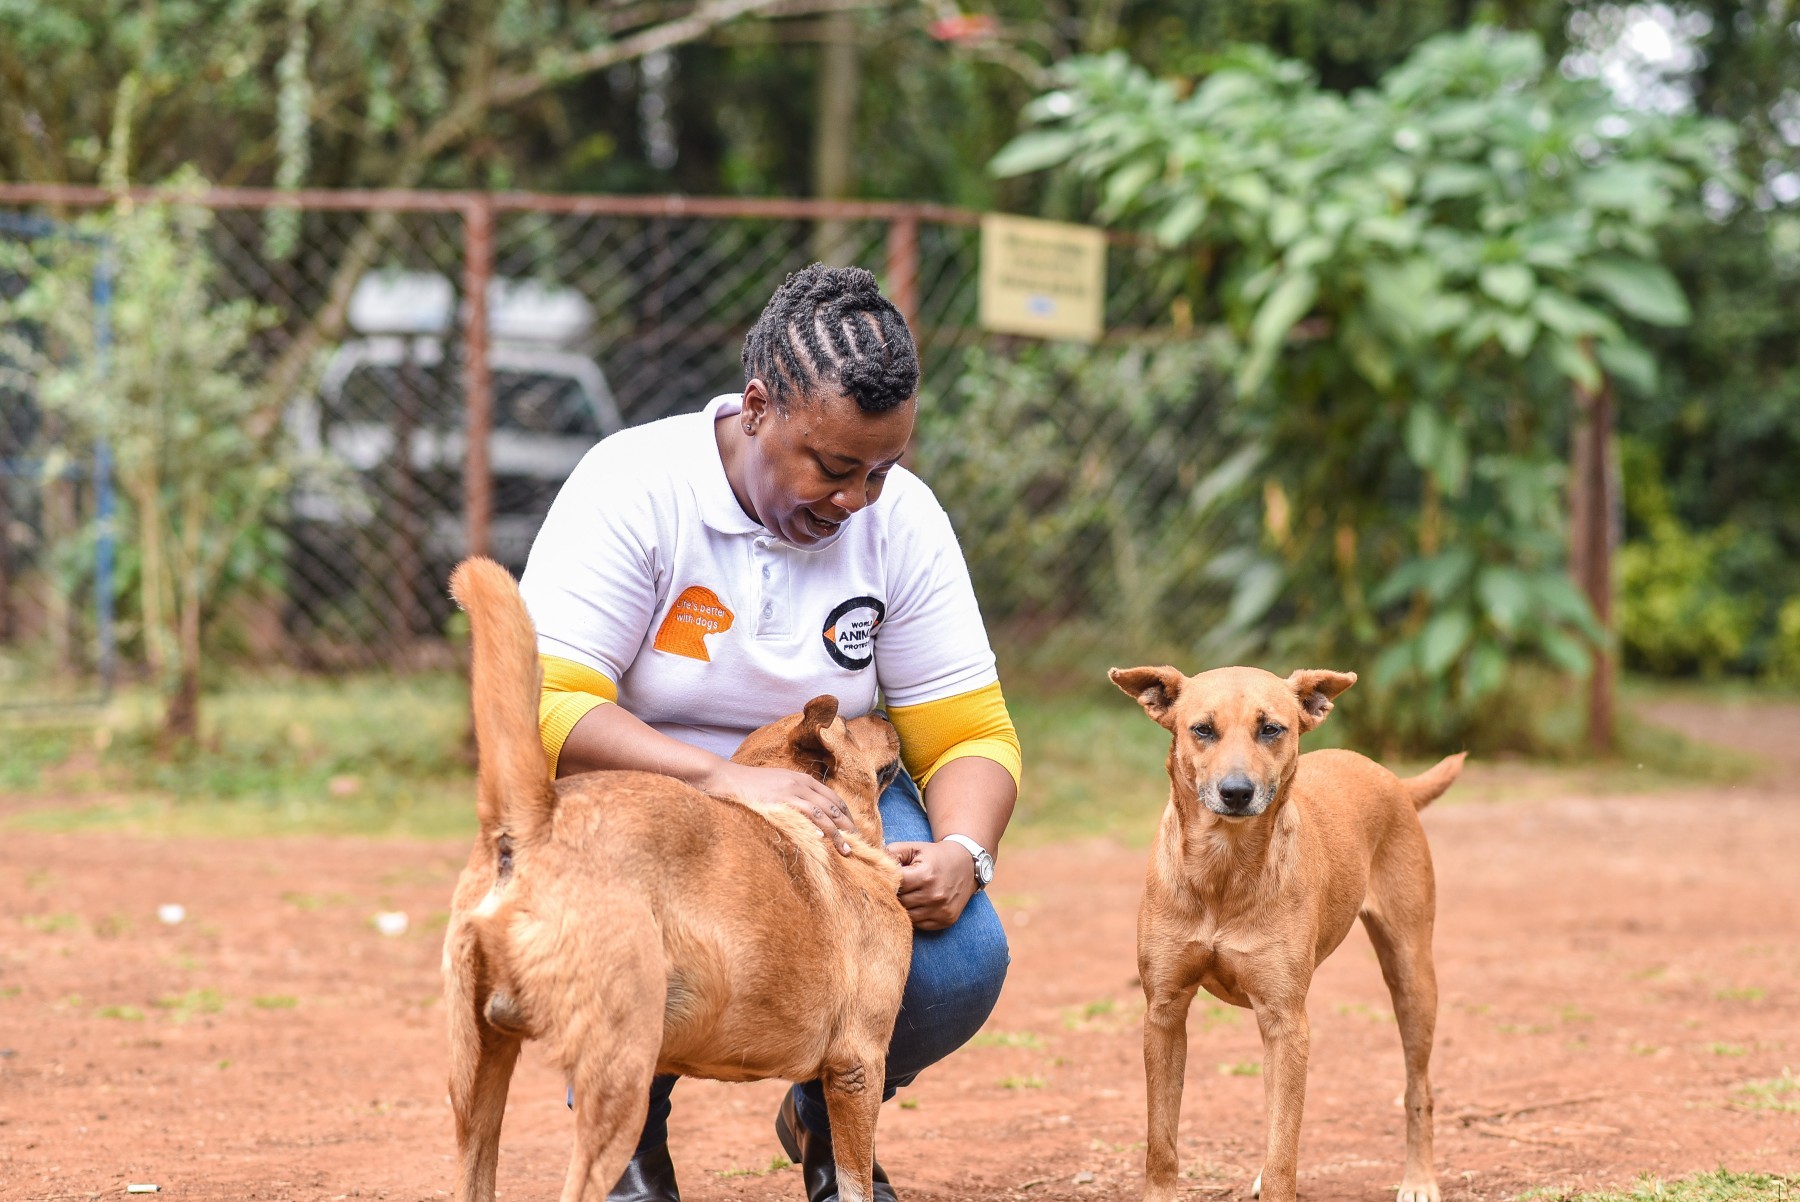 World Animal Protection staff looking over two dogs